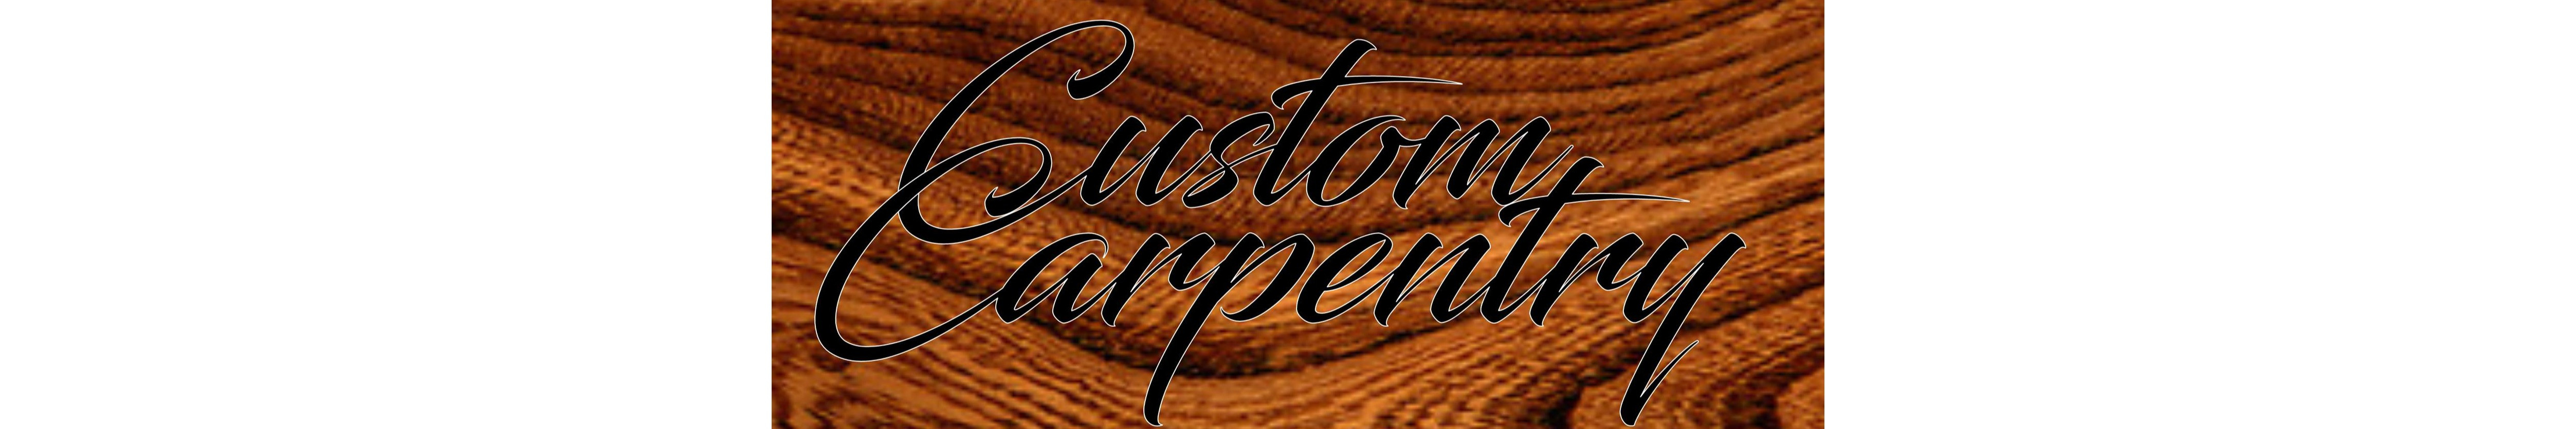 Custom Carpentry for all your carpentry needs big or small